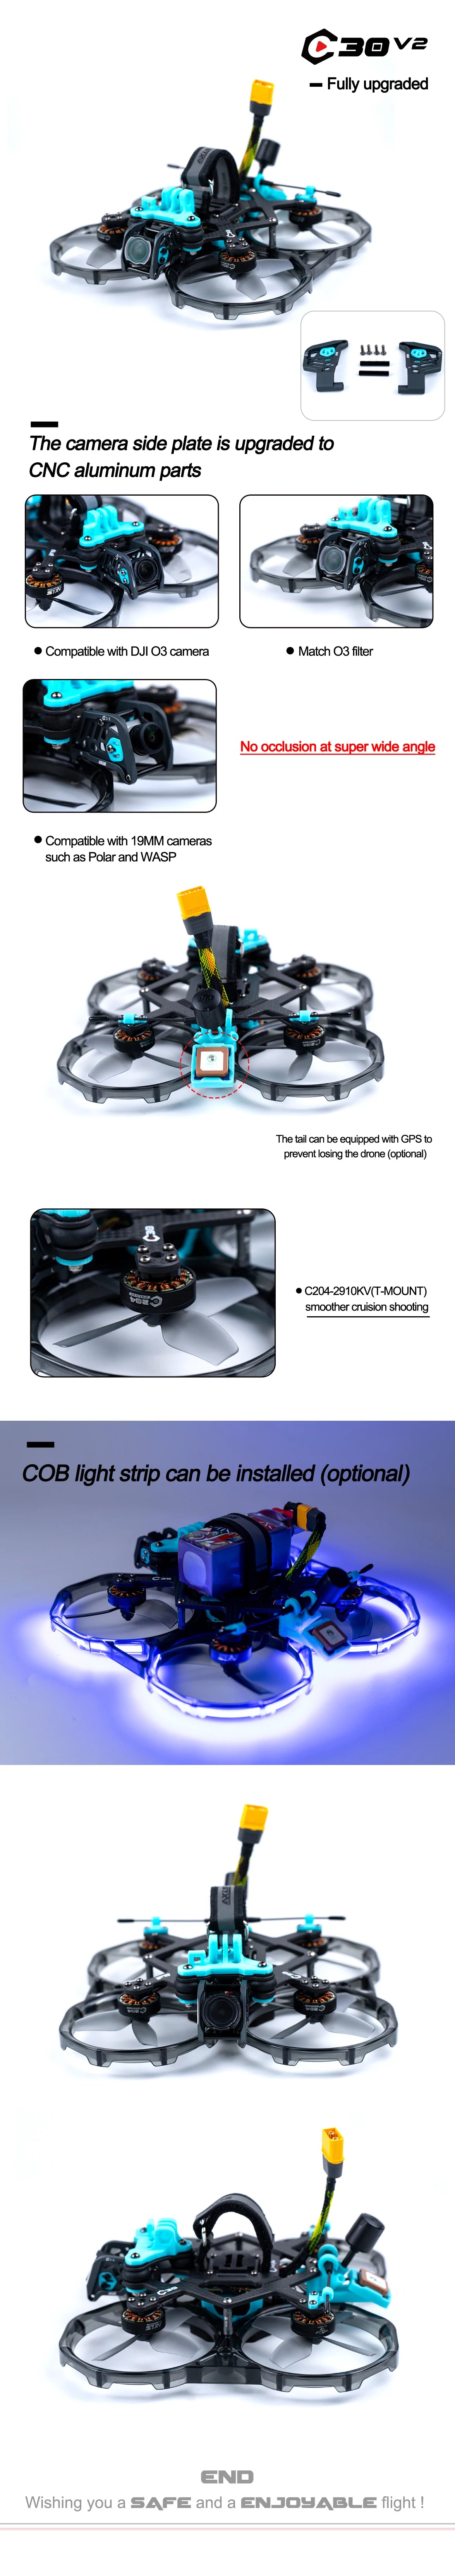 Axisflying CineON C30, 30vz Fully upgraded The camera side plate is upgraded to CNC aluminum parts Compatible with DJI